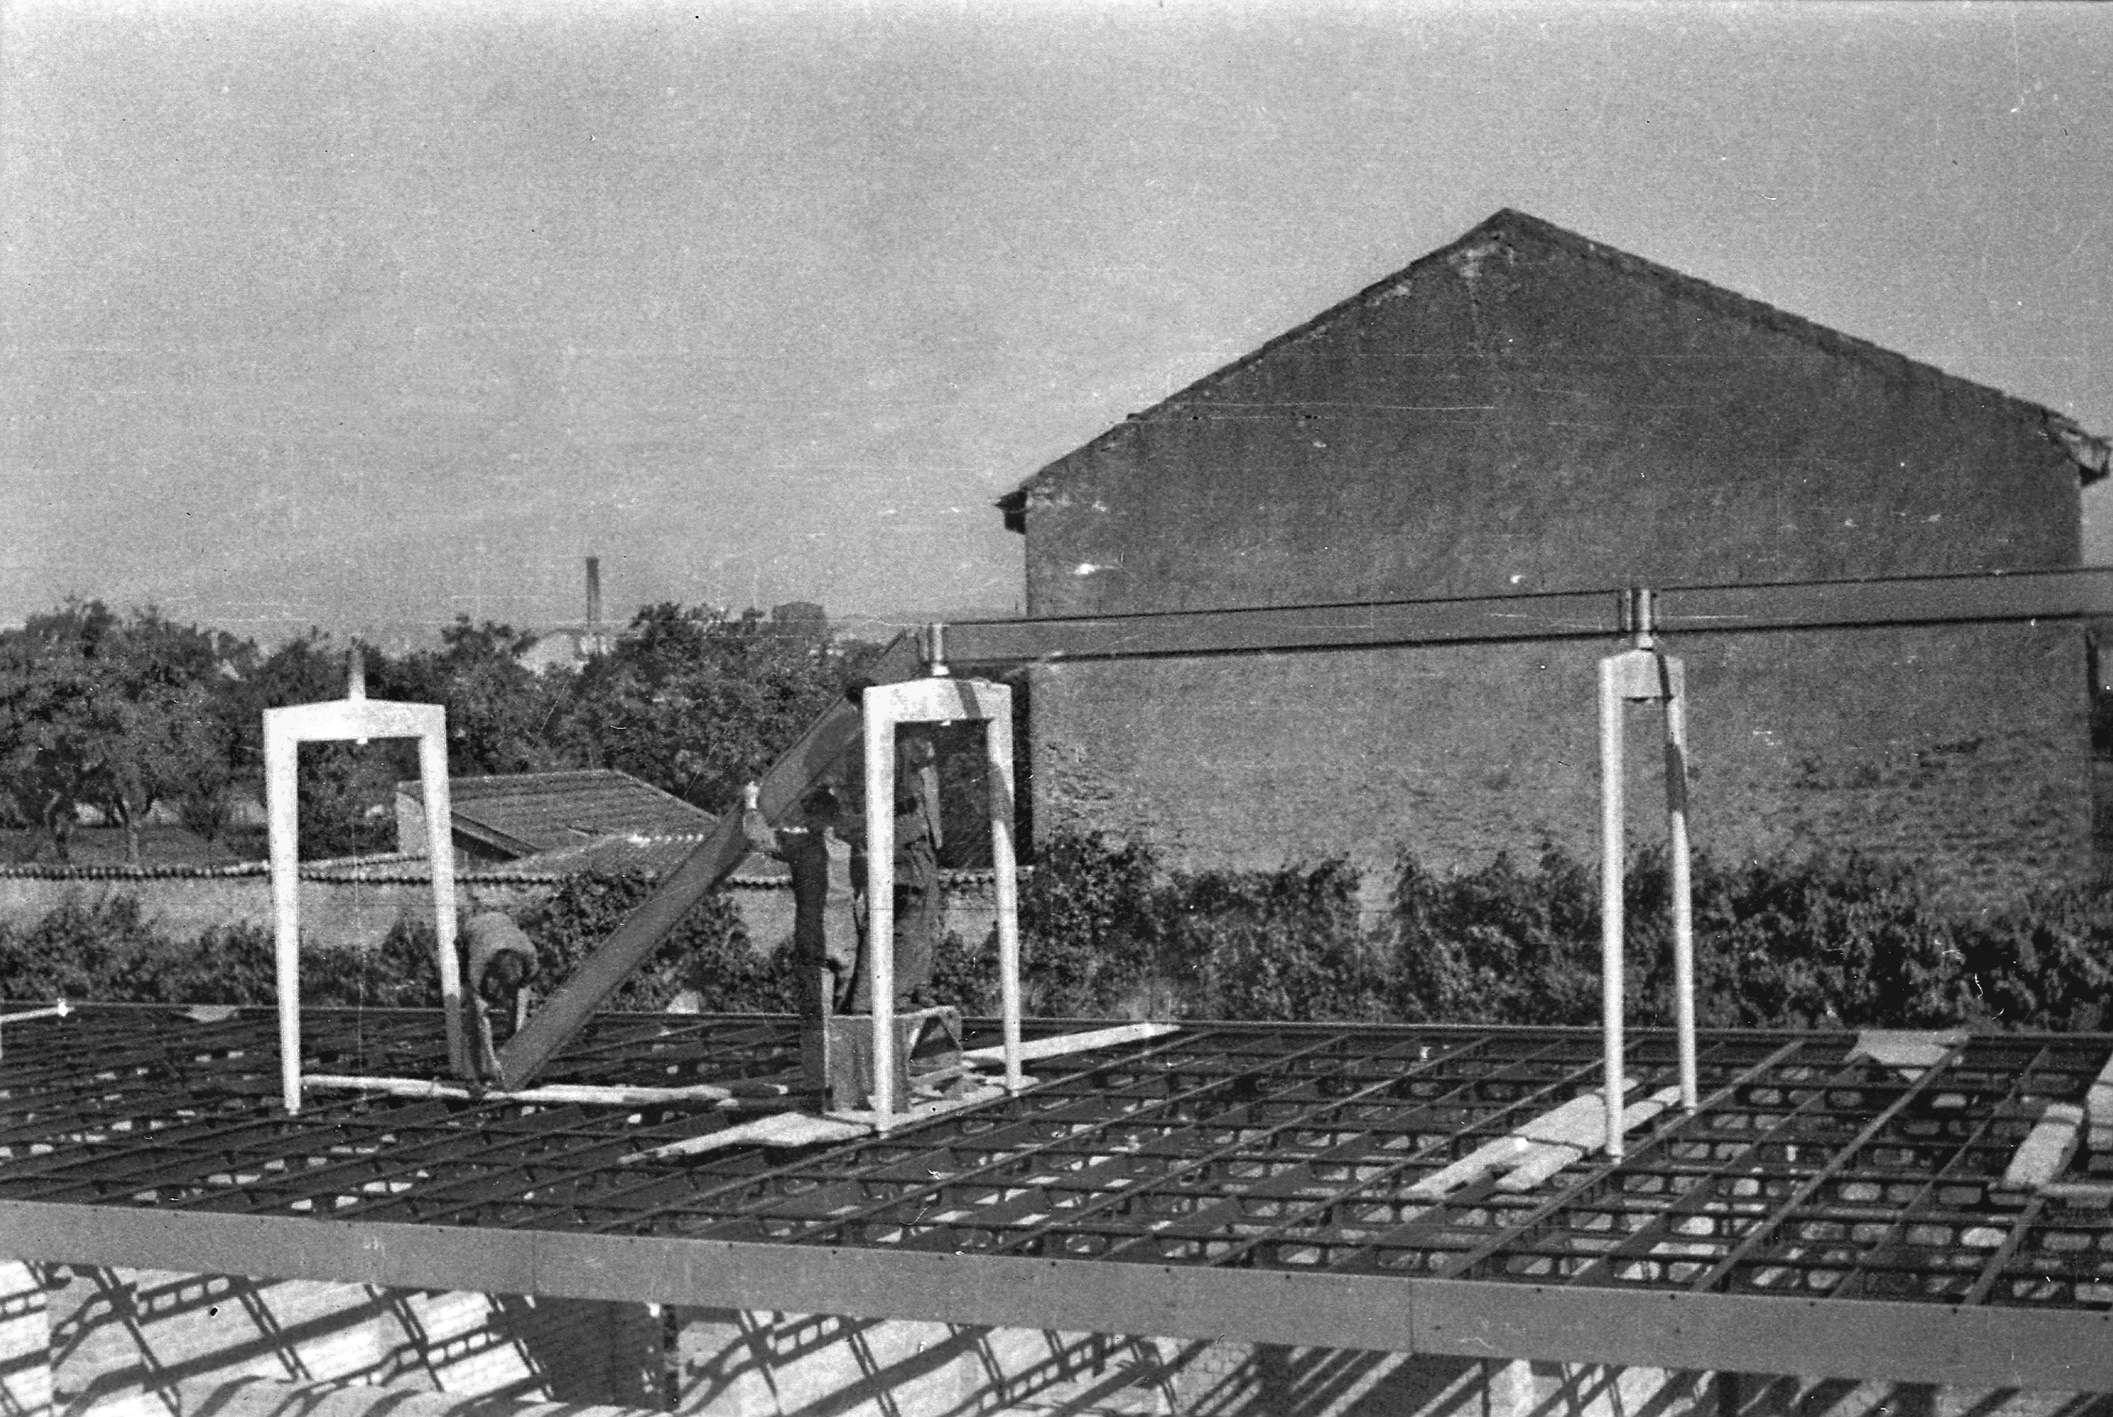 Ferembal house, Nancy. Assembling the metal floor structure and the metal frame, summer 1948.